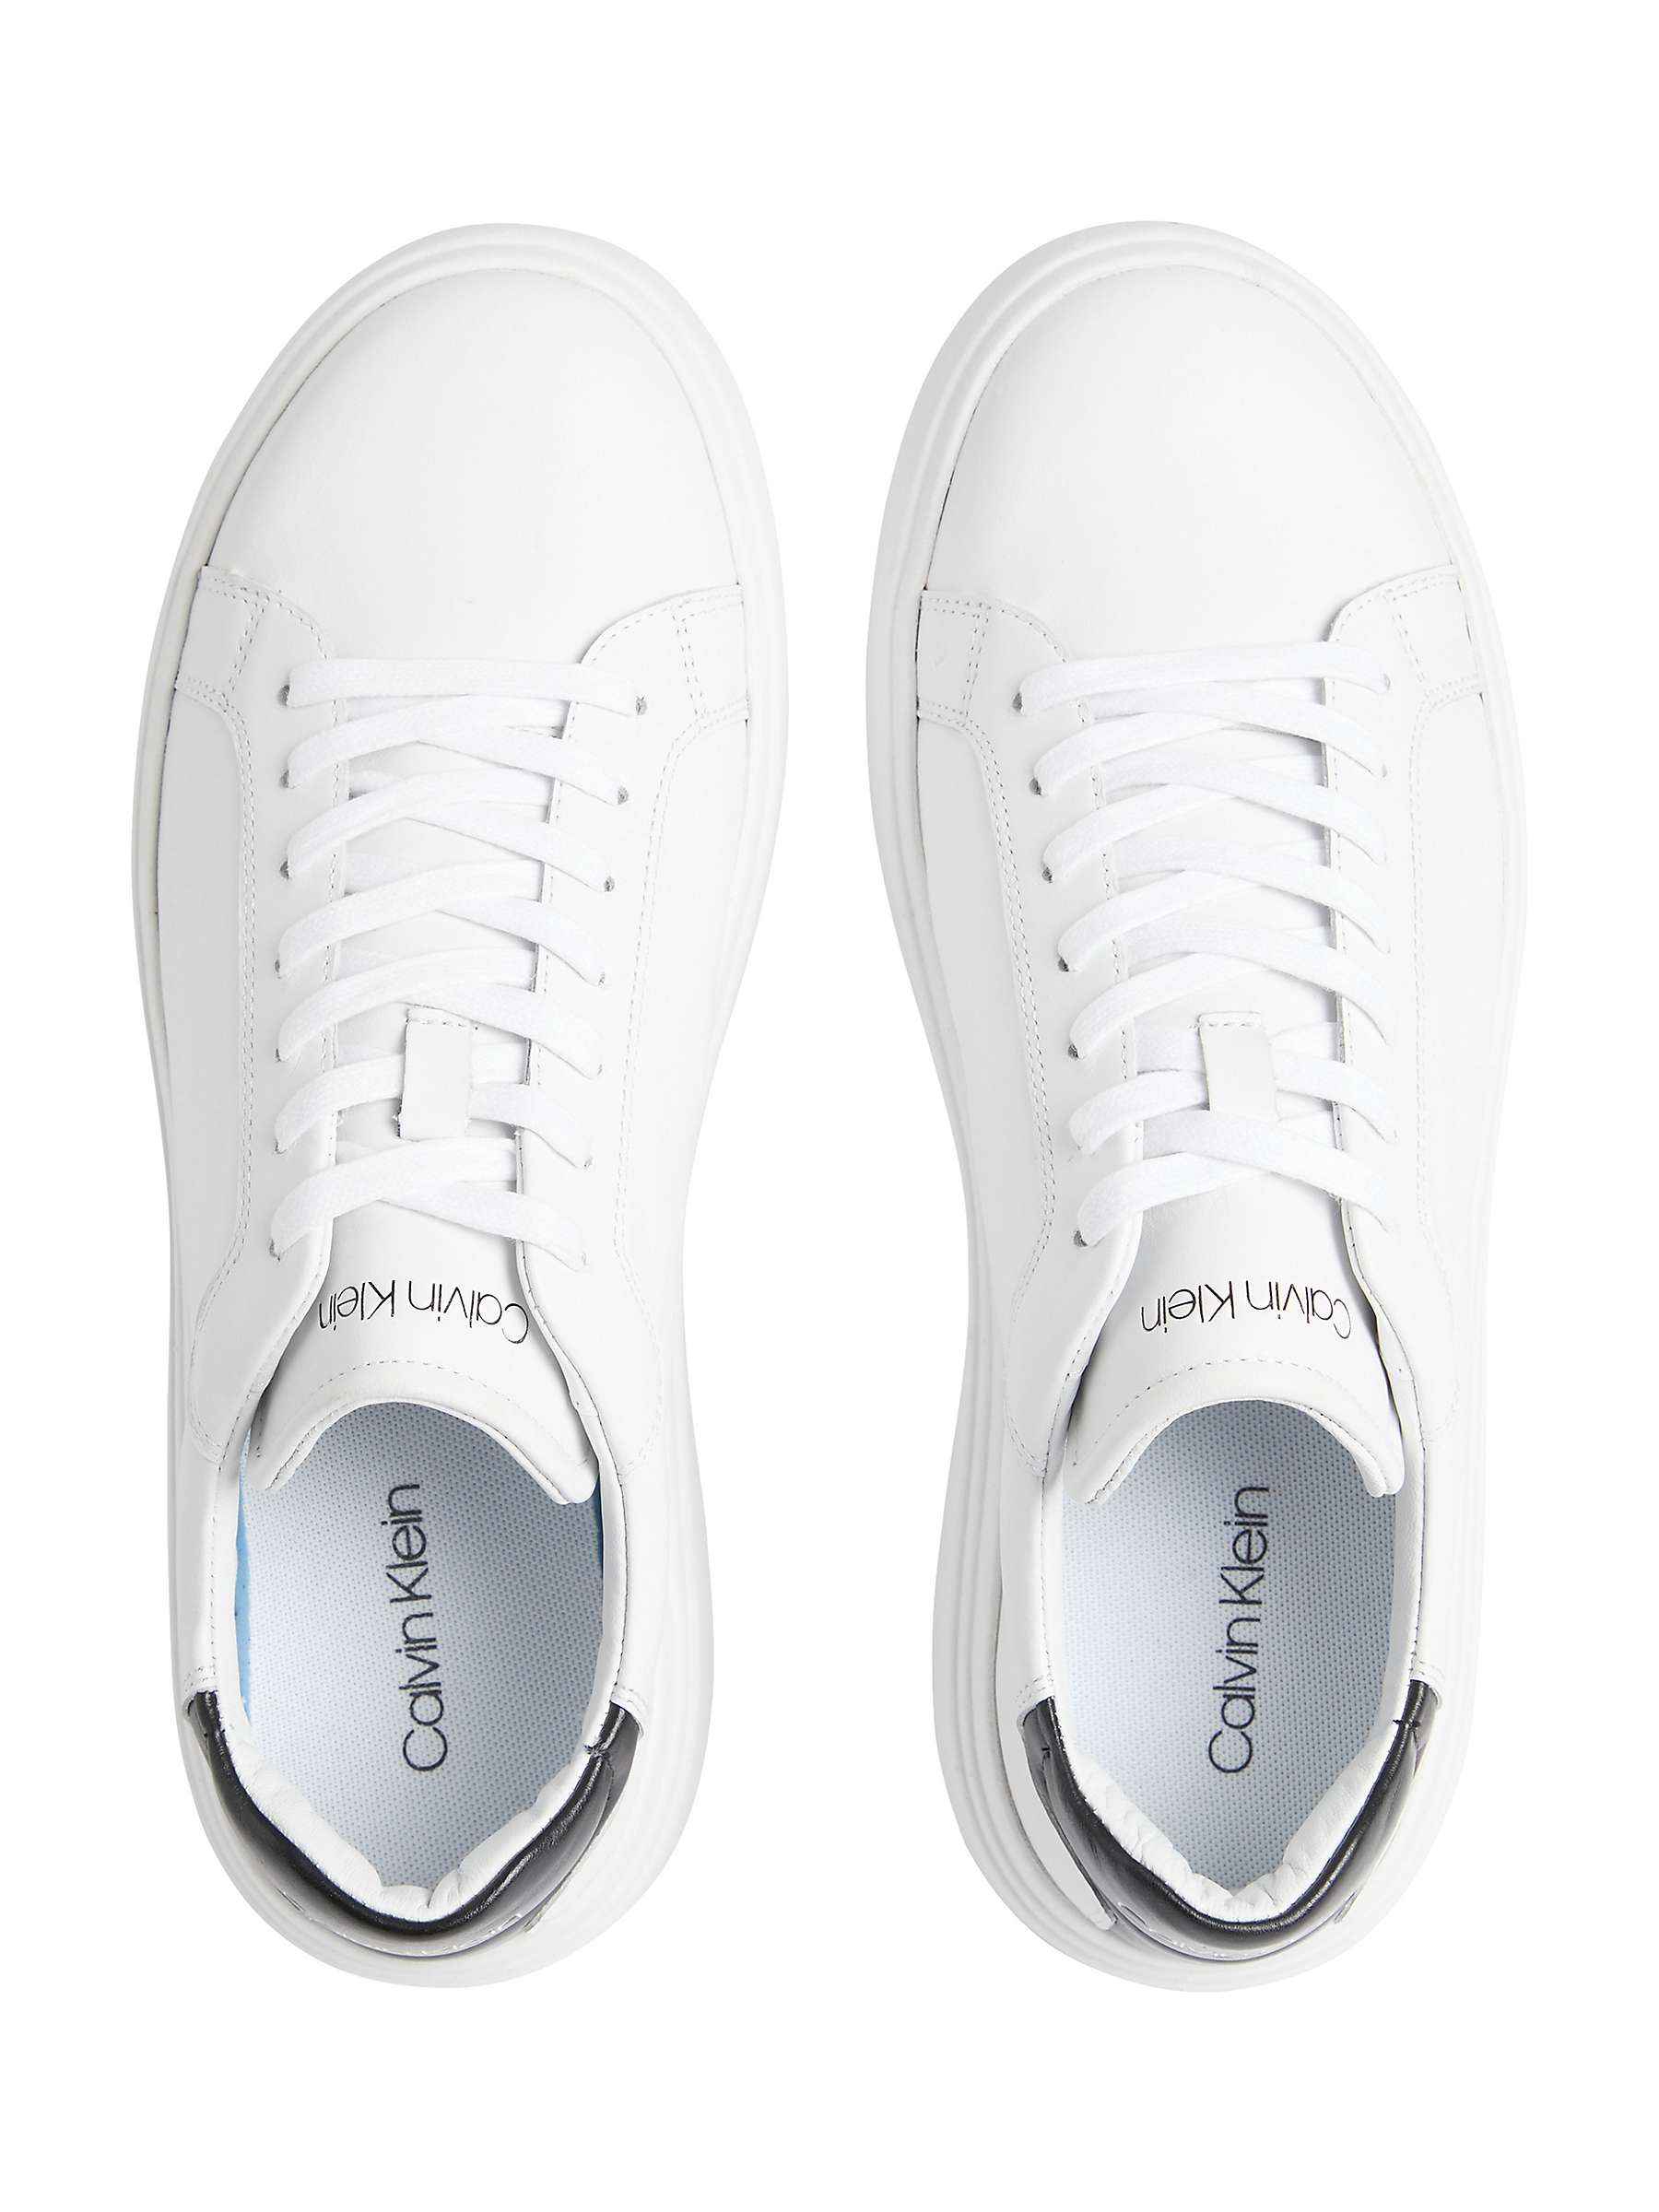 Buy Calvin Klein Leather Low Top Lace Up Trainers, White/Black Online at johnlewis.com